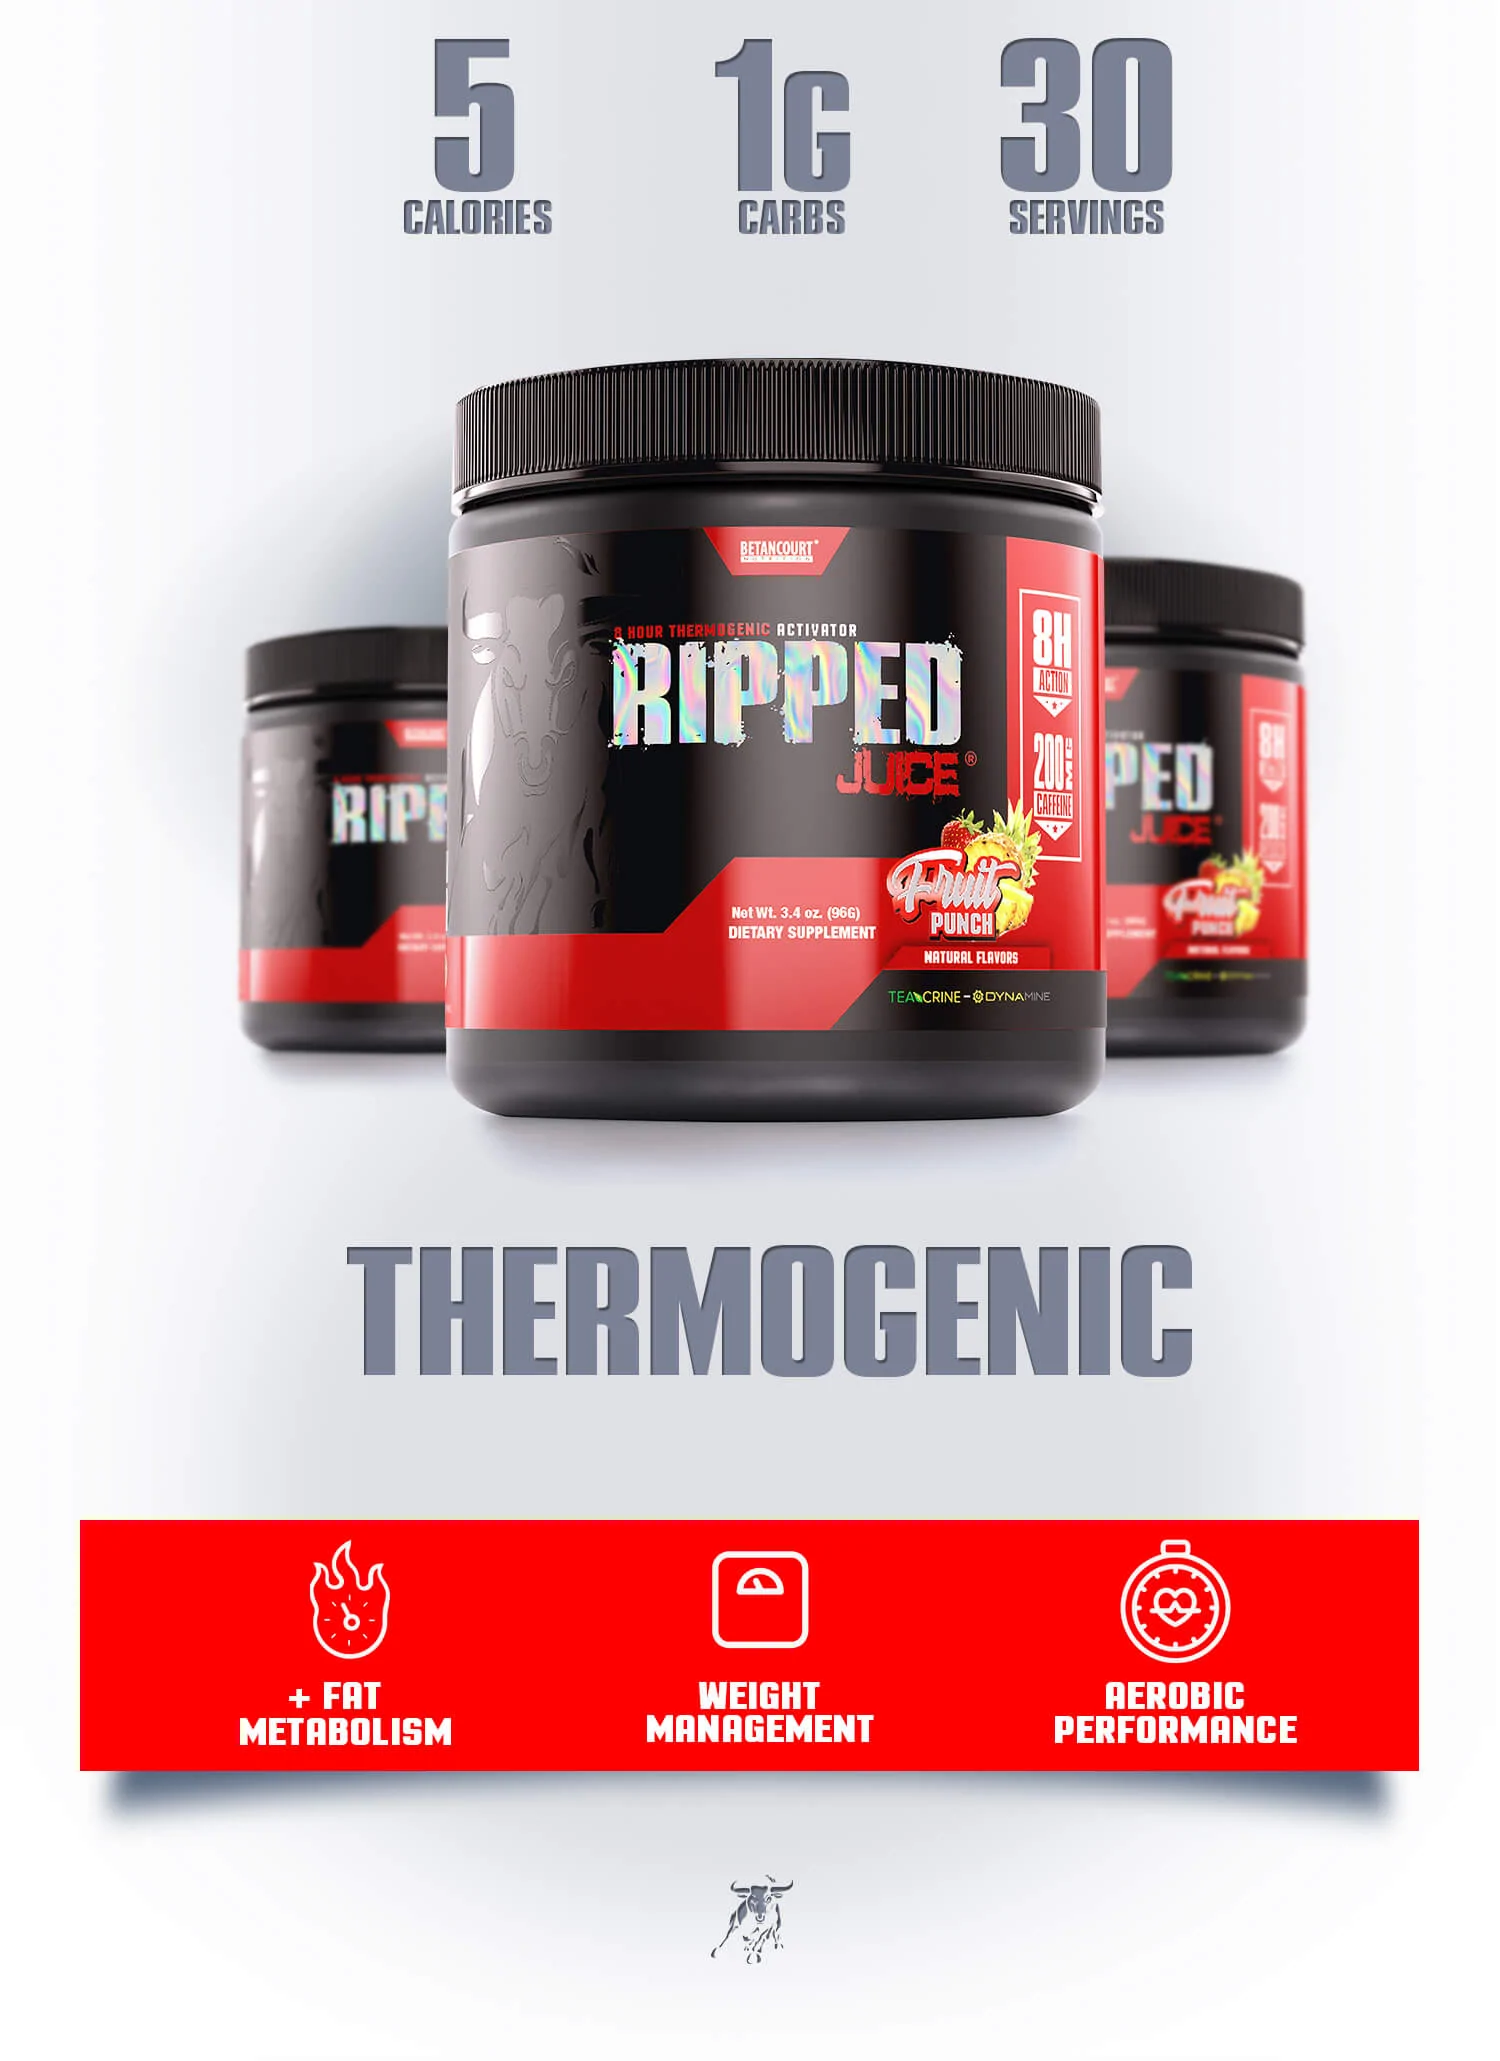 Clearance Betancourt B-NOX Ripped Juice (8-HOUR THERMOGENIC ACTIVATOR) - 30 Servings Exp. June 2024